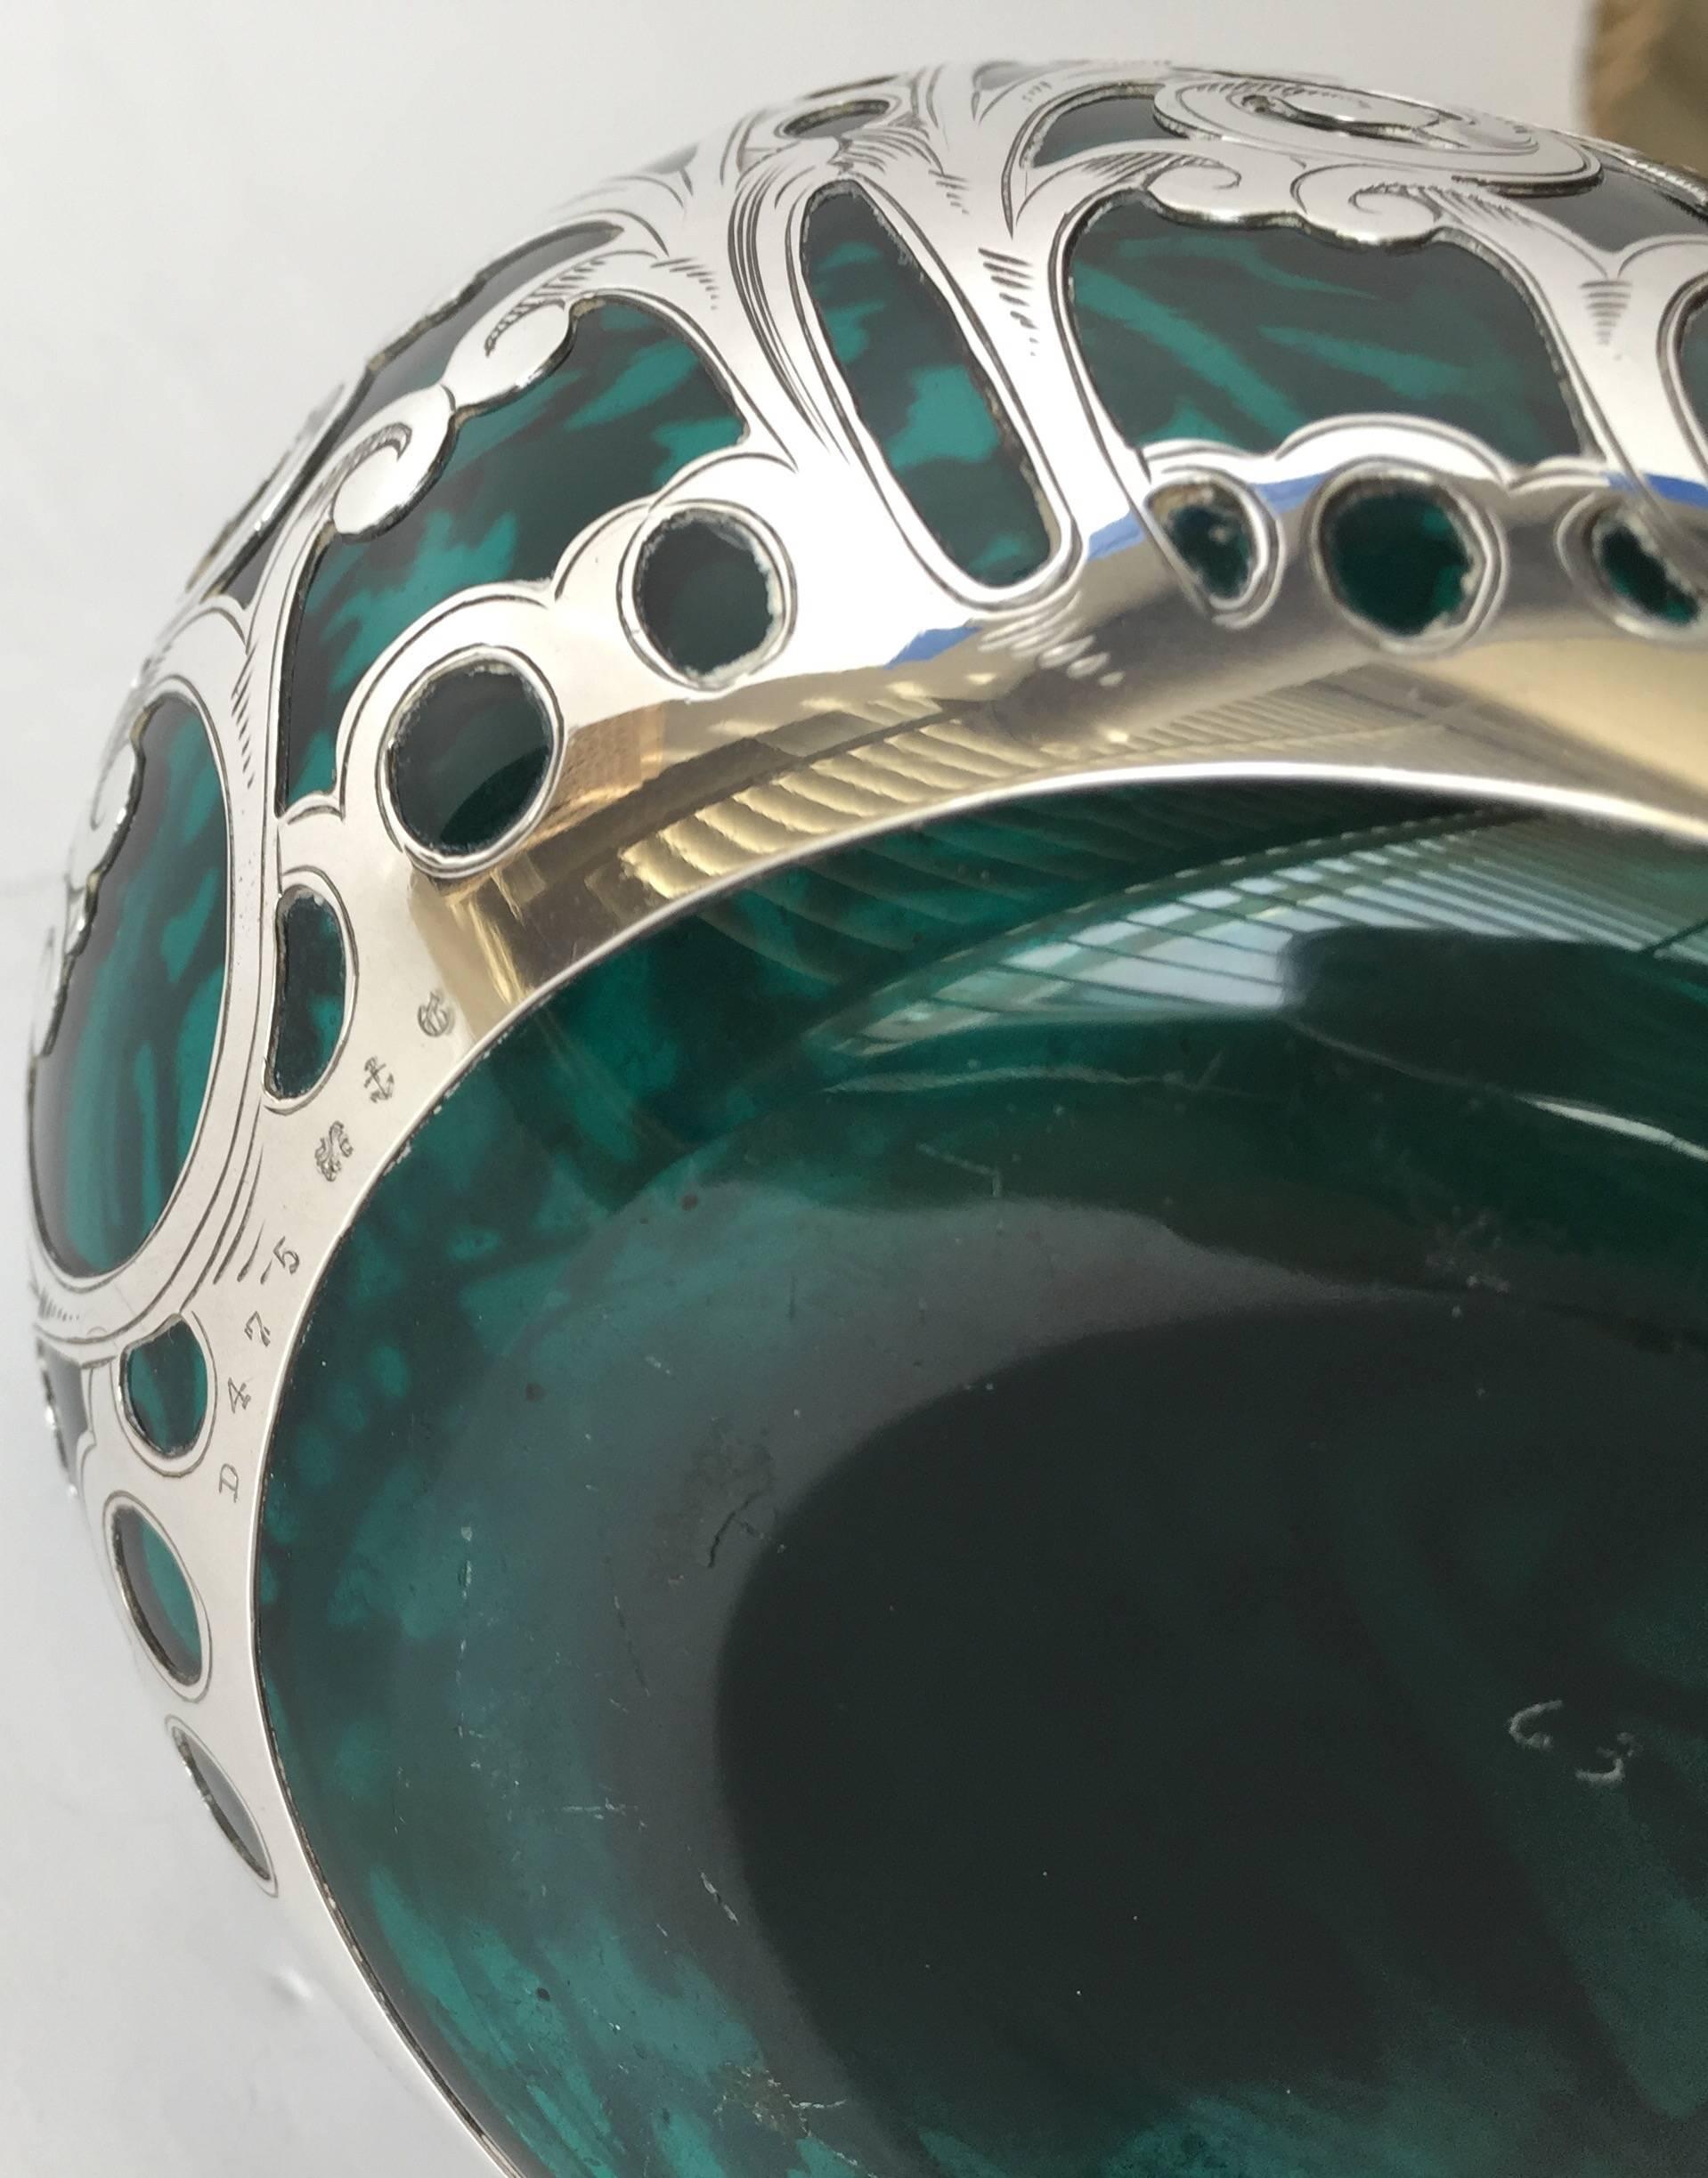 Art Nouveau green blue glass silver overlay decanter 19th century, with an applied silver handle and stopper. Beautiful silver work on this example, the design strong and the silver chased over, with no monogram present. In very nice condition for